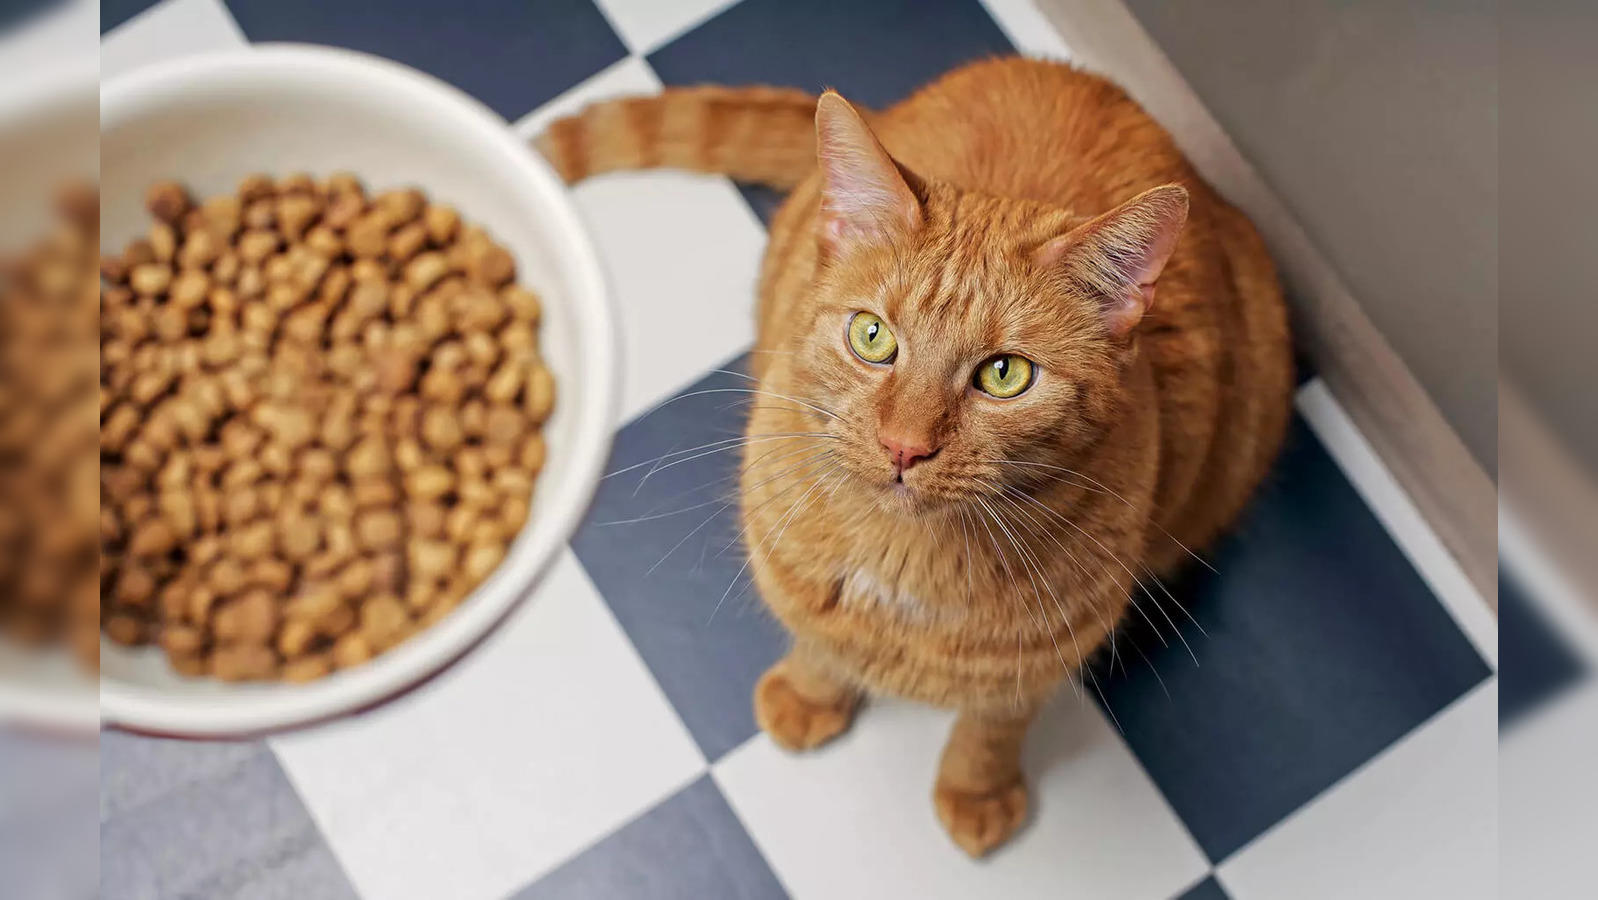 Cat Food: Irresistible and Best Cat Food That Pampers, Nourishes